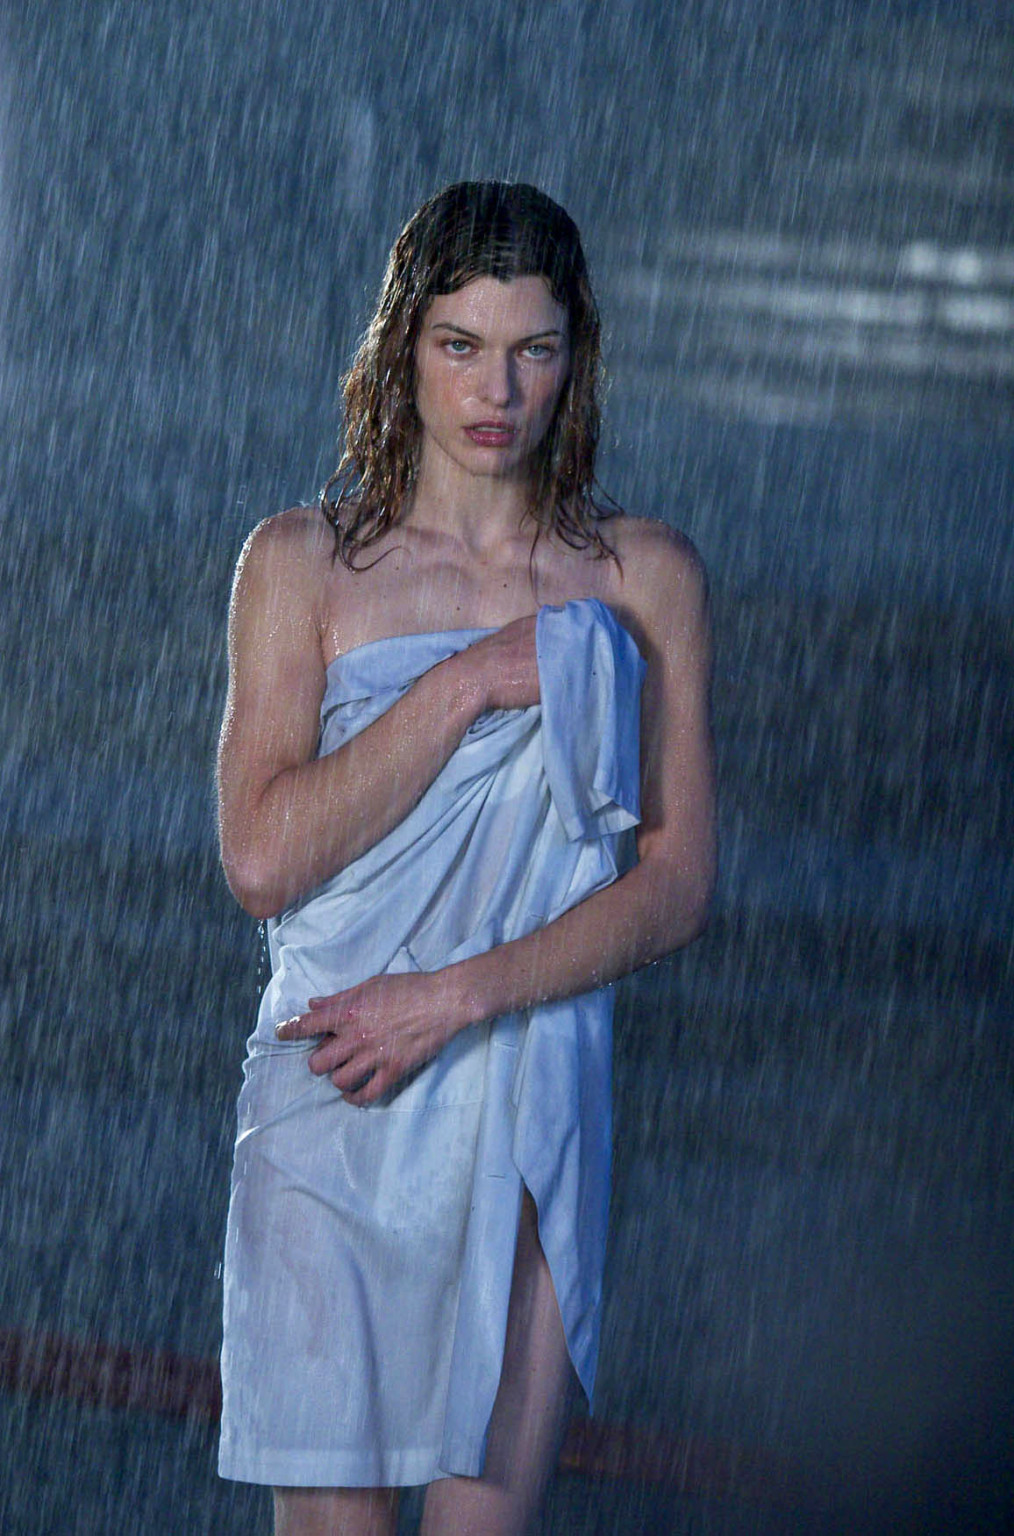 Milla Jovovich looking hot  armed to the teeth in the 'Resident Evil: Apocalypse